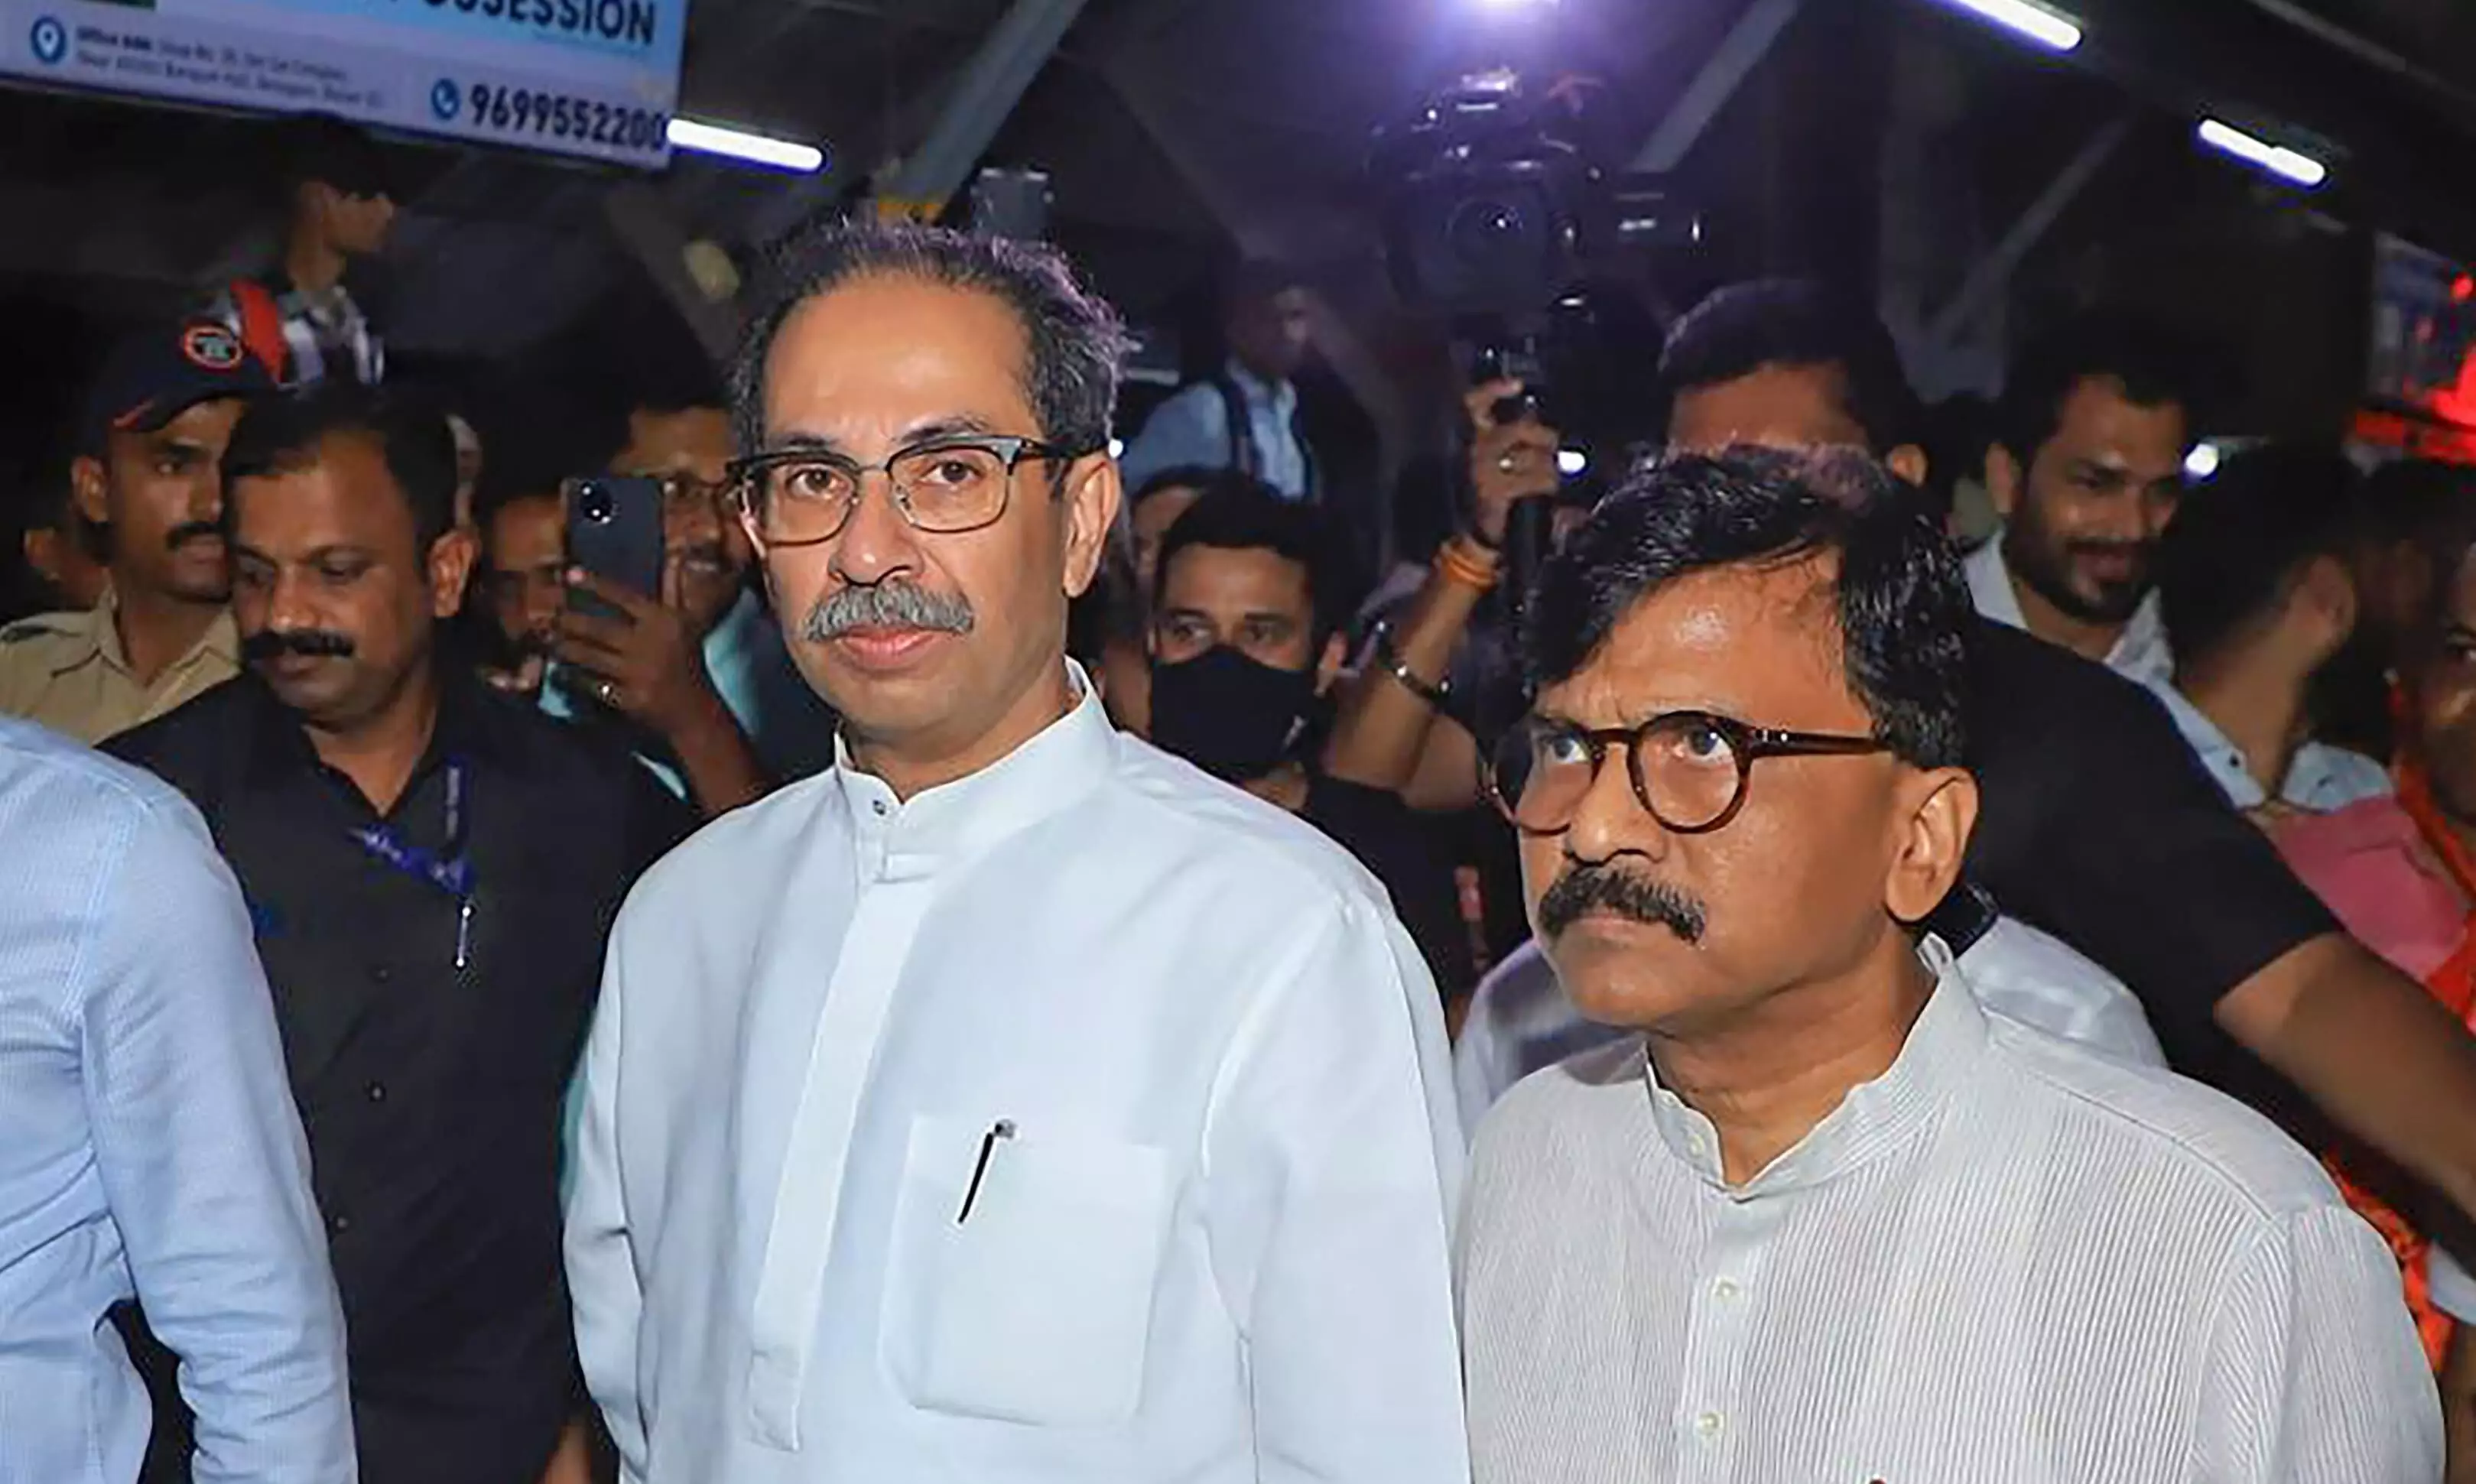 Flaming torch will reduce autocratic regime to ashes: Uddhav attacks BJP